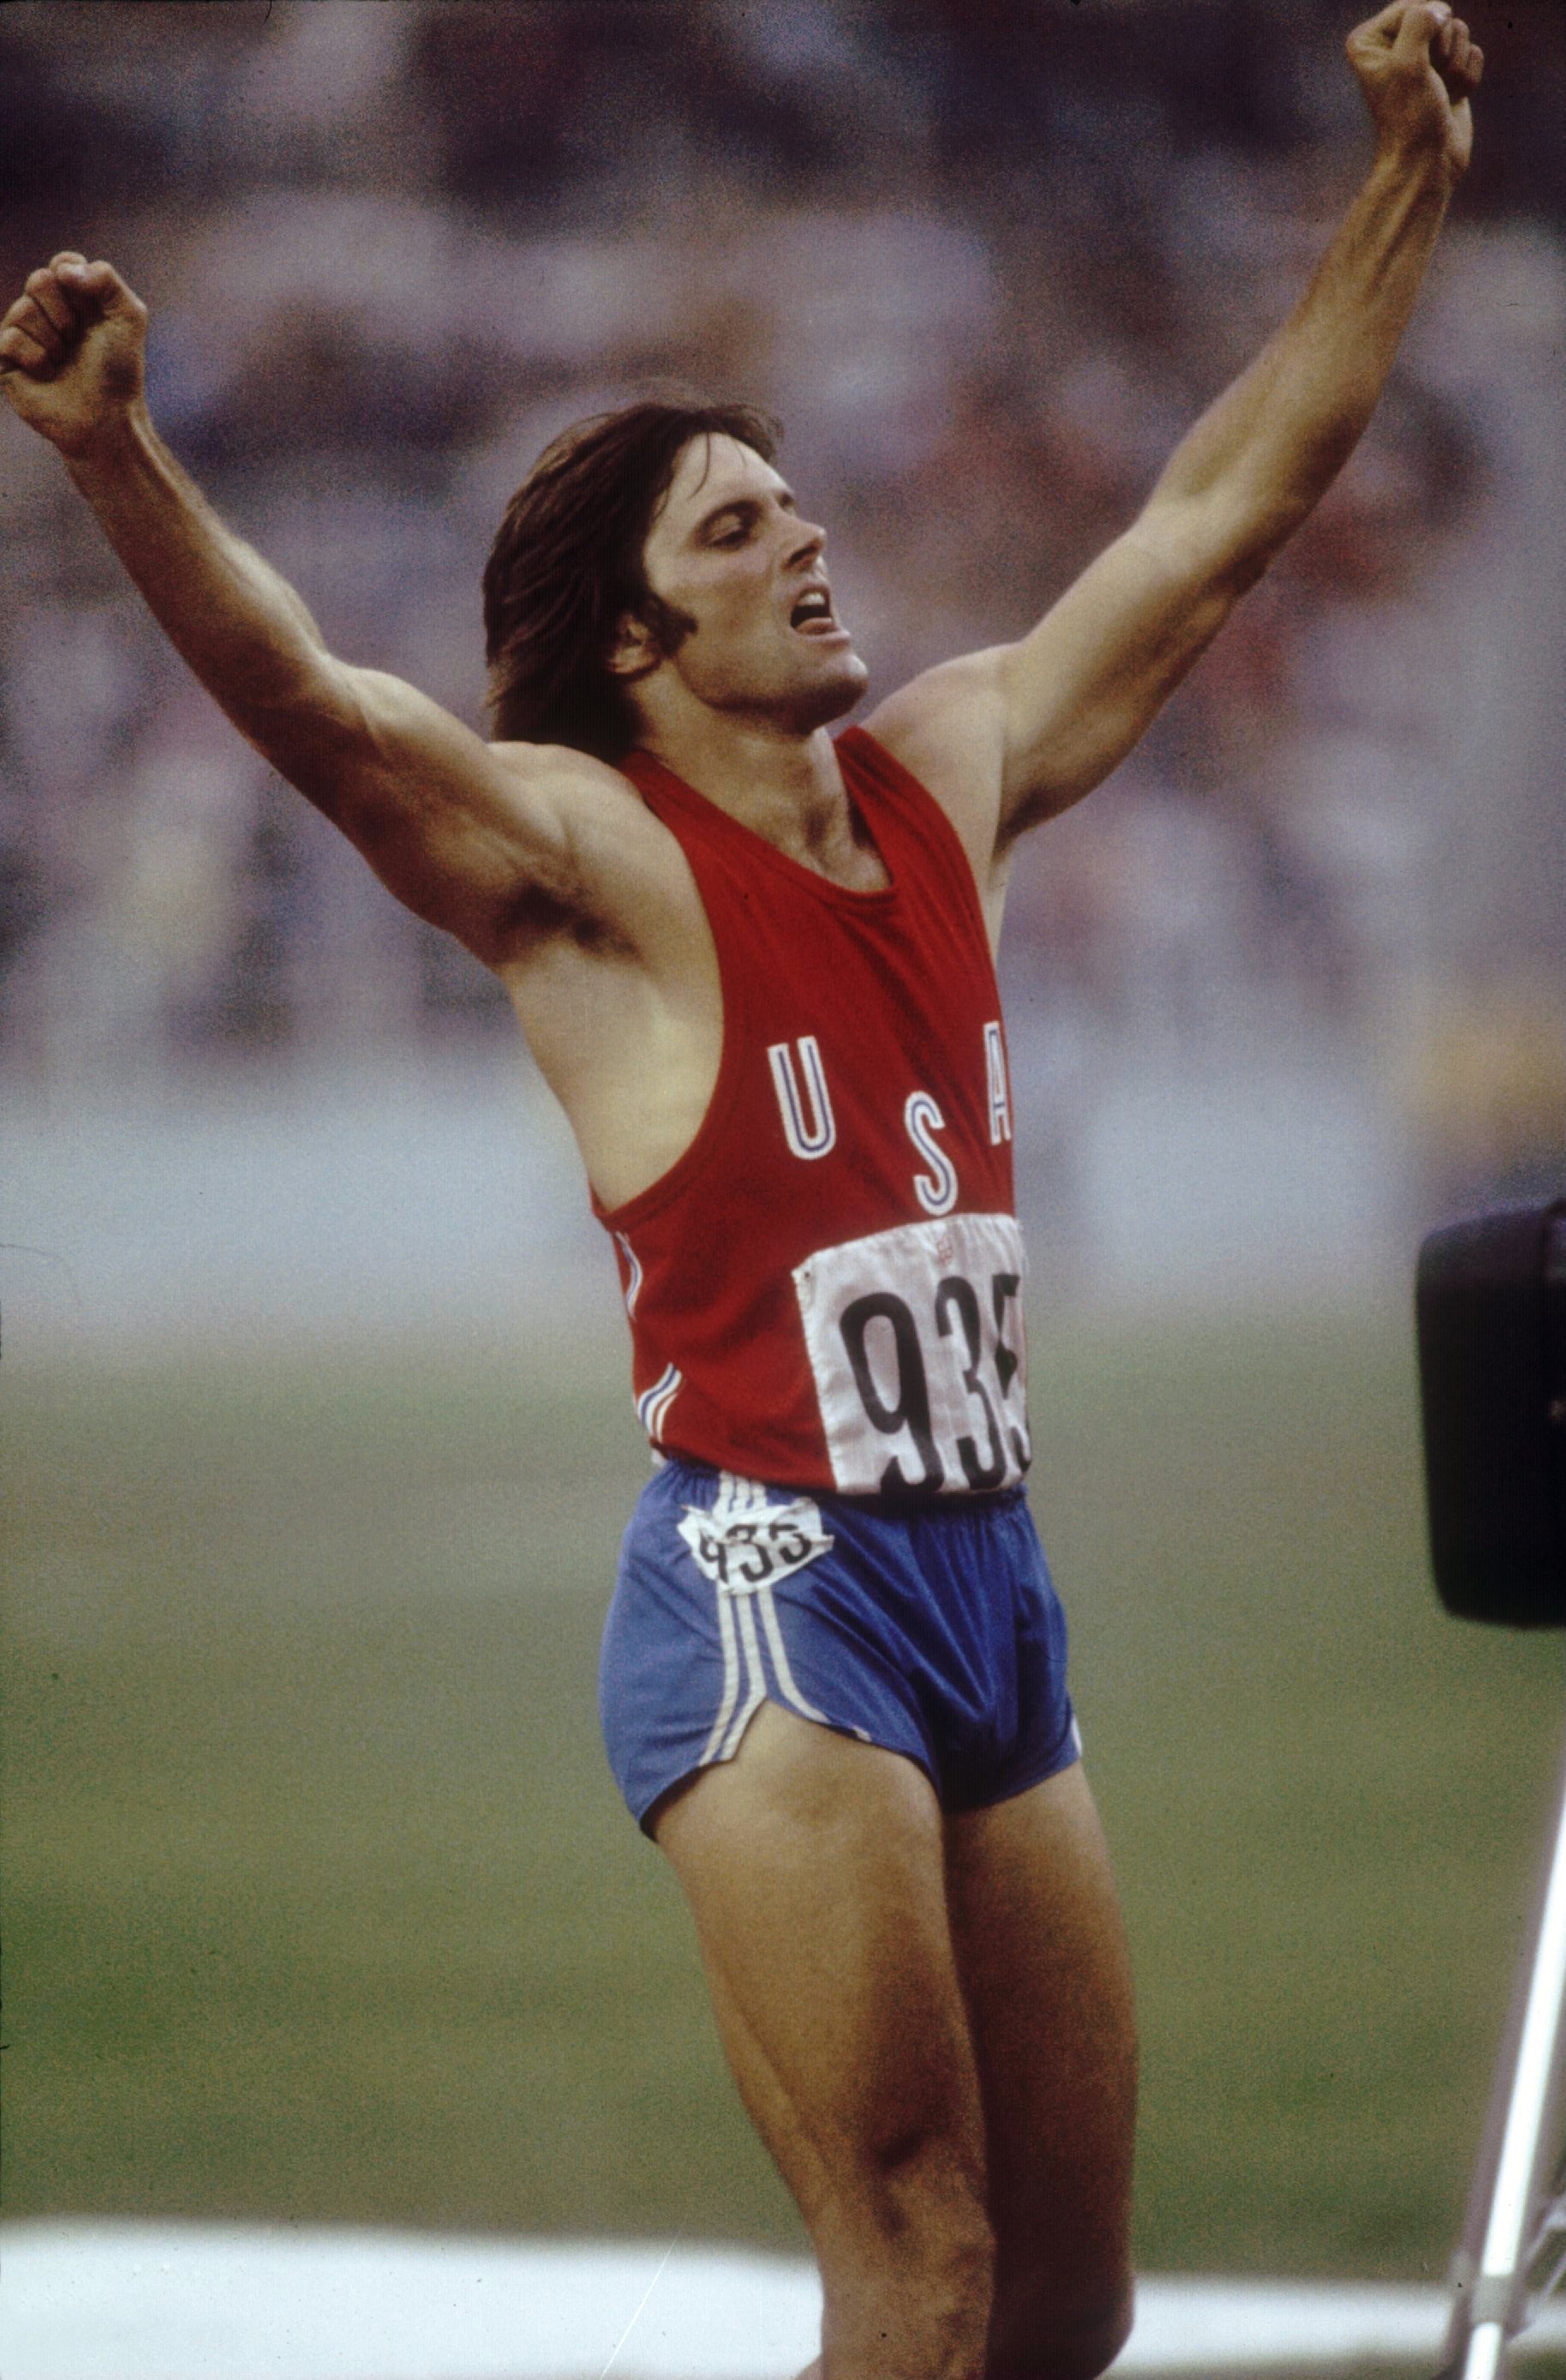 Bruce Jenner of the USA celebrates during his record setting performance in the decathlon in the 1976 Summer Olympics in Montreal, Canada. | Photo: GettyImages/ Tony Duffy/Allsport